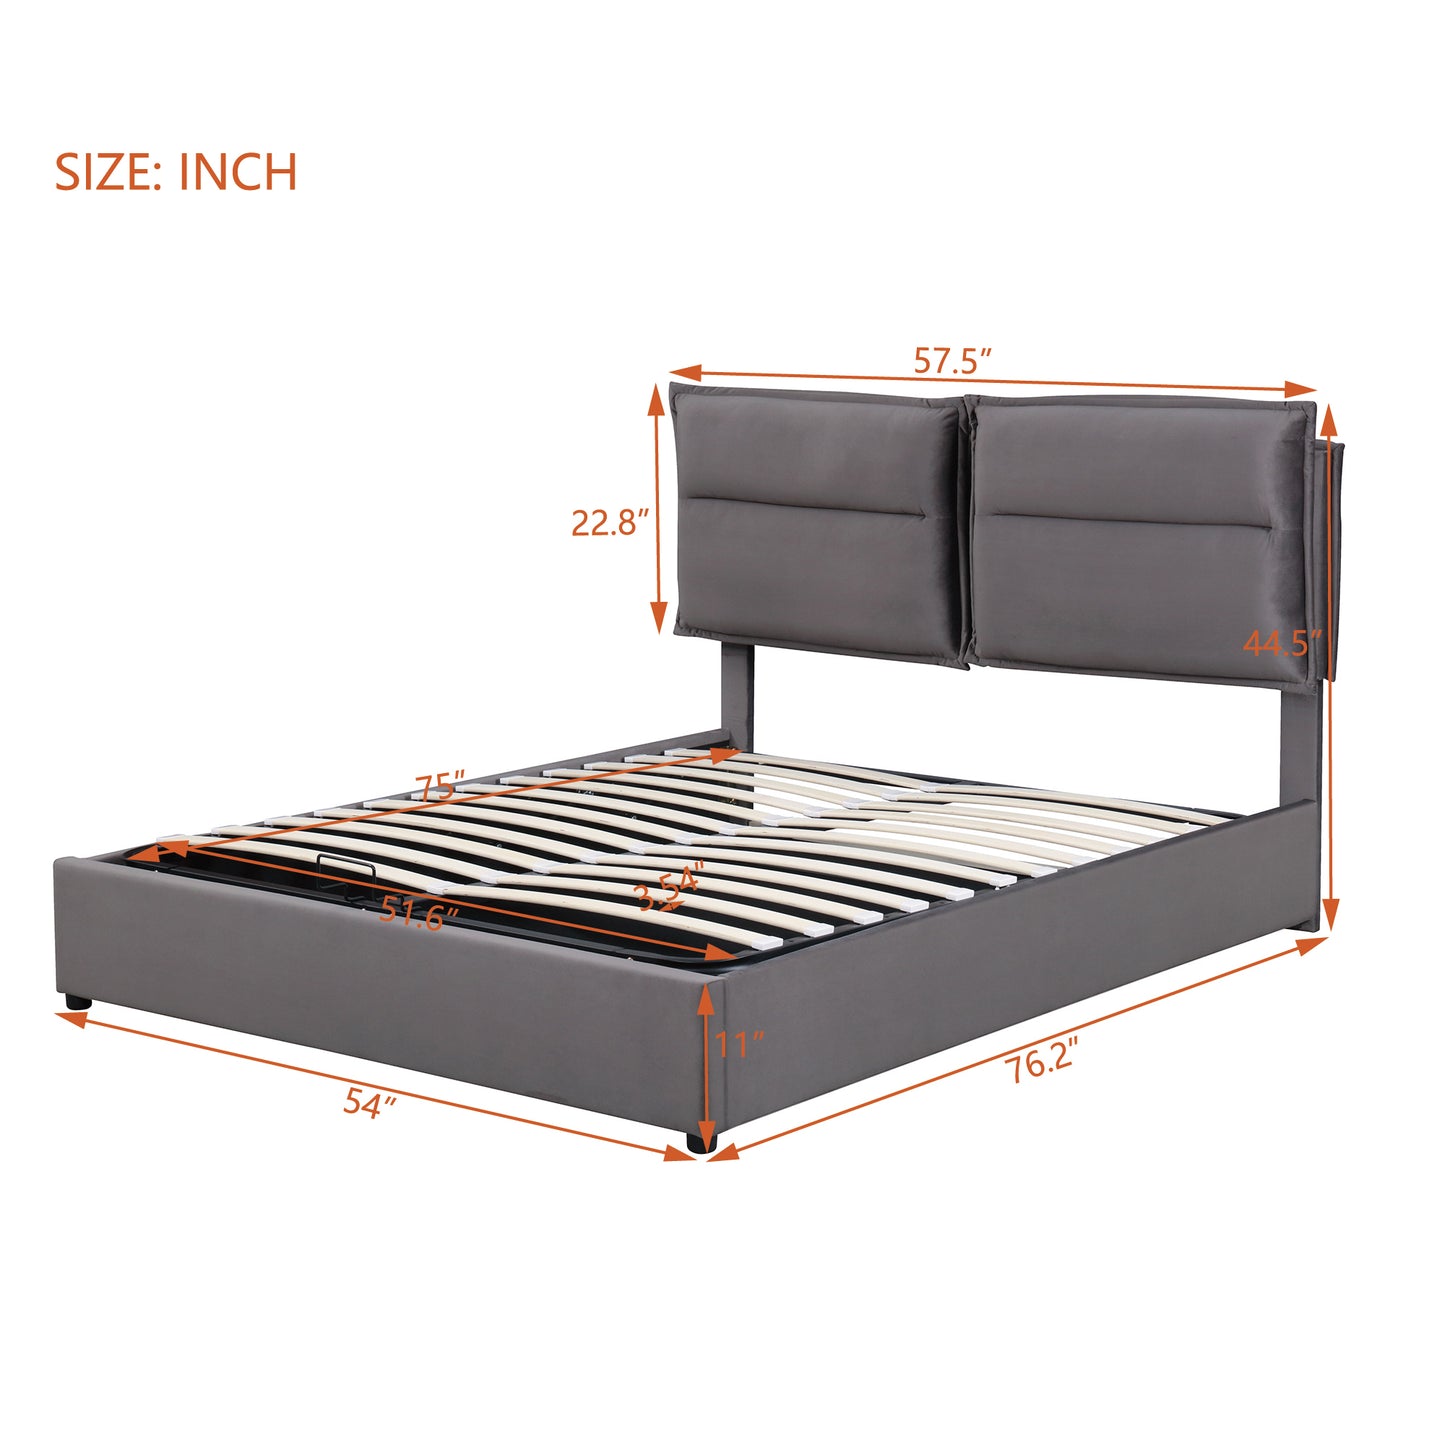 Upholstered Platform bed with a Hydraulic Storage System, Full size, Gray